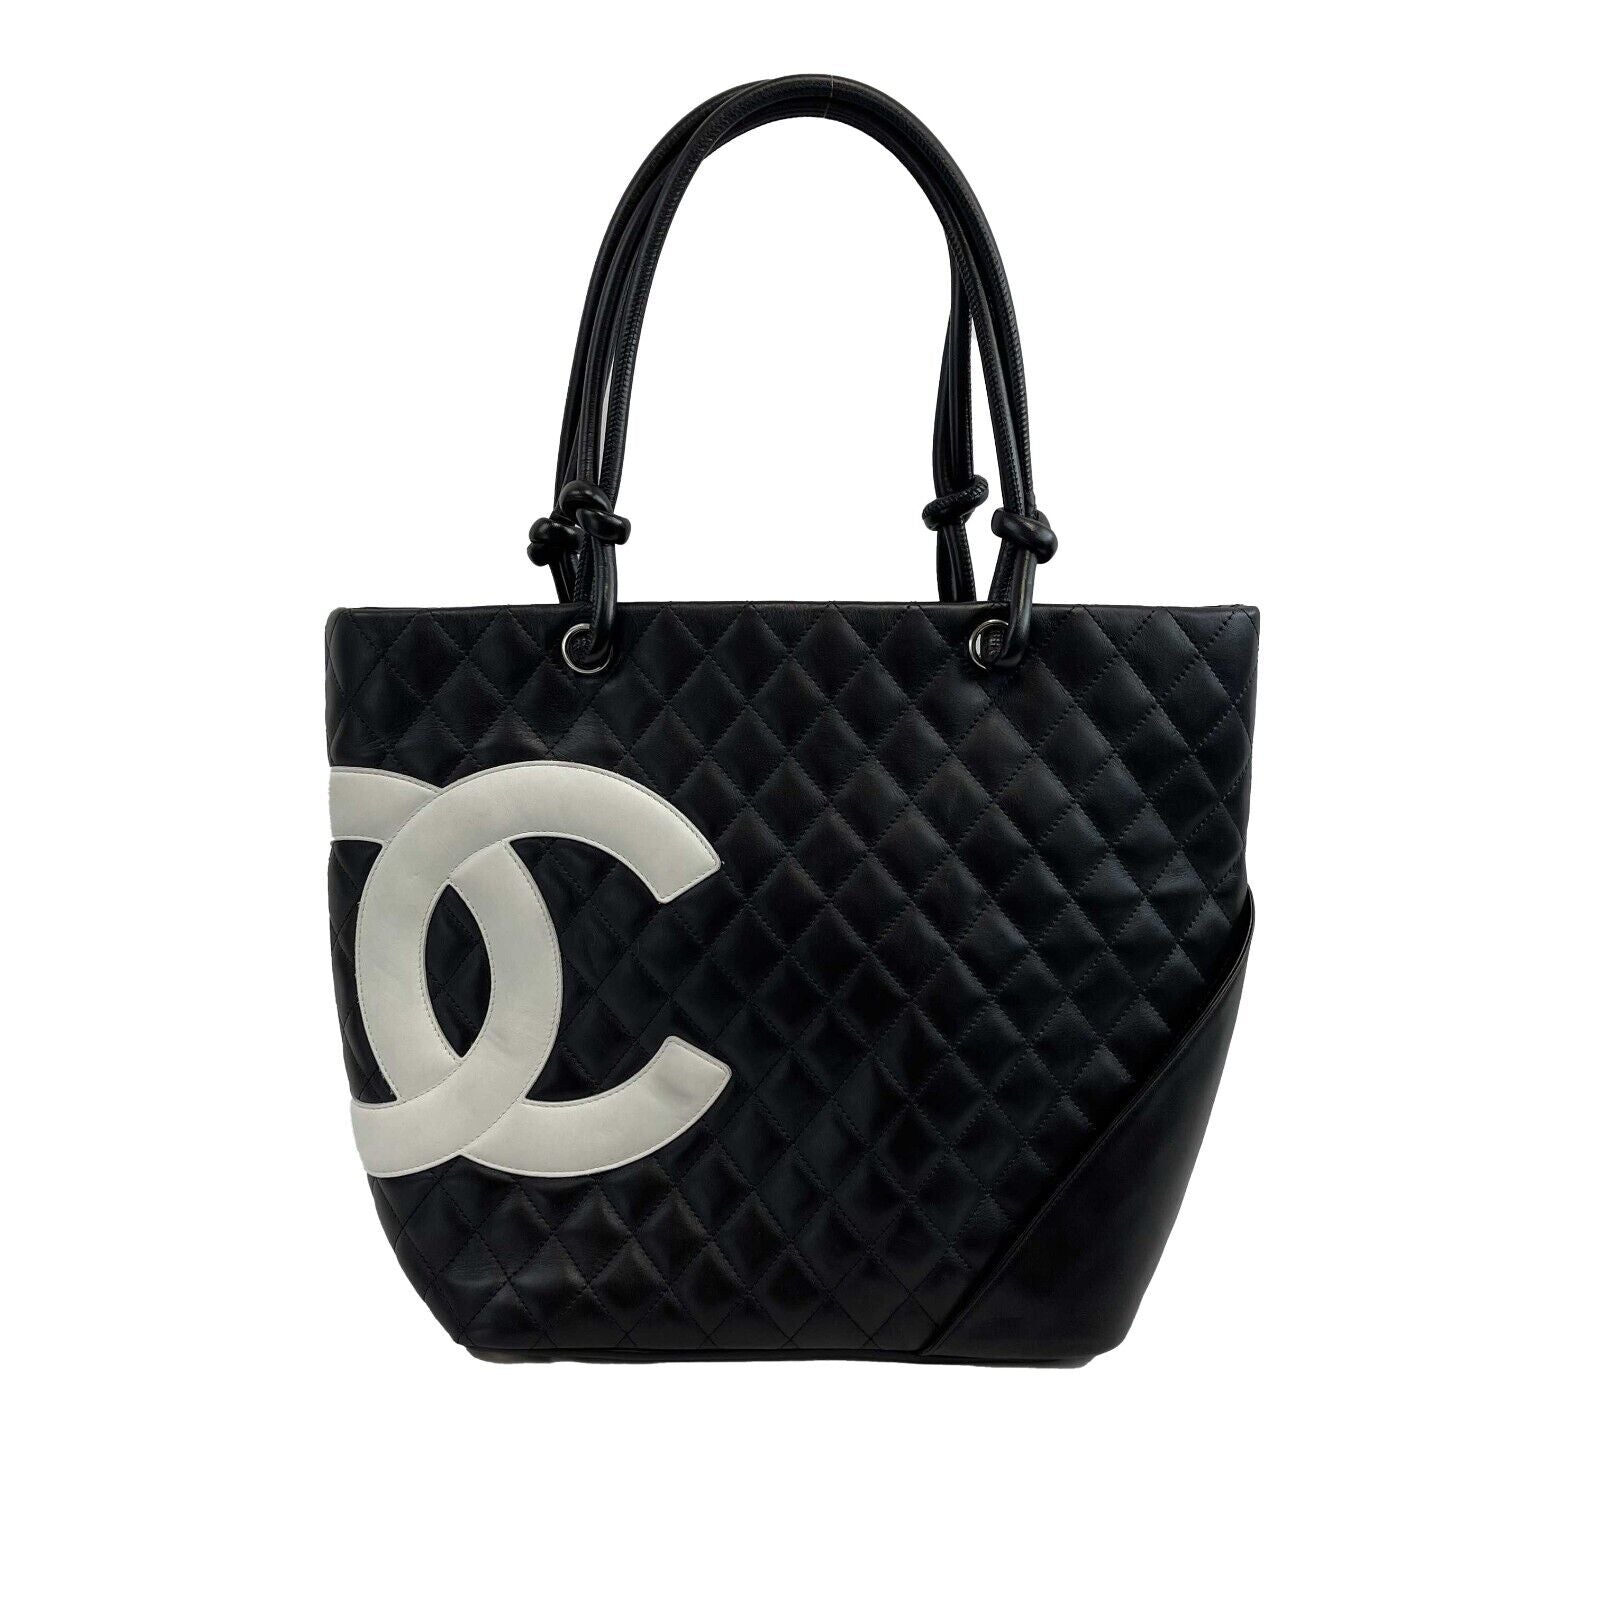 CHANEL - Excellent - Cambon Large Tote Black White CC Leather